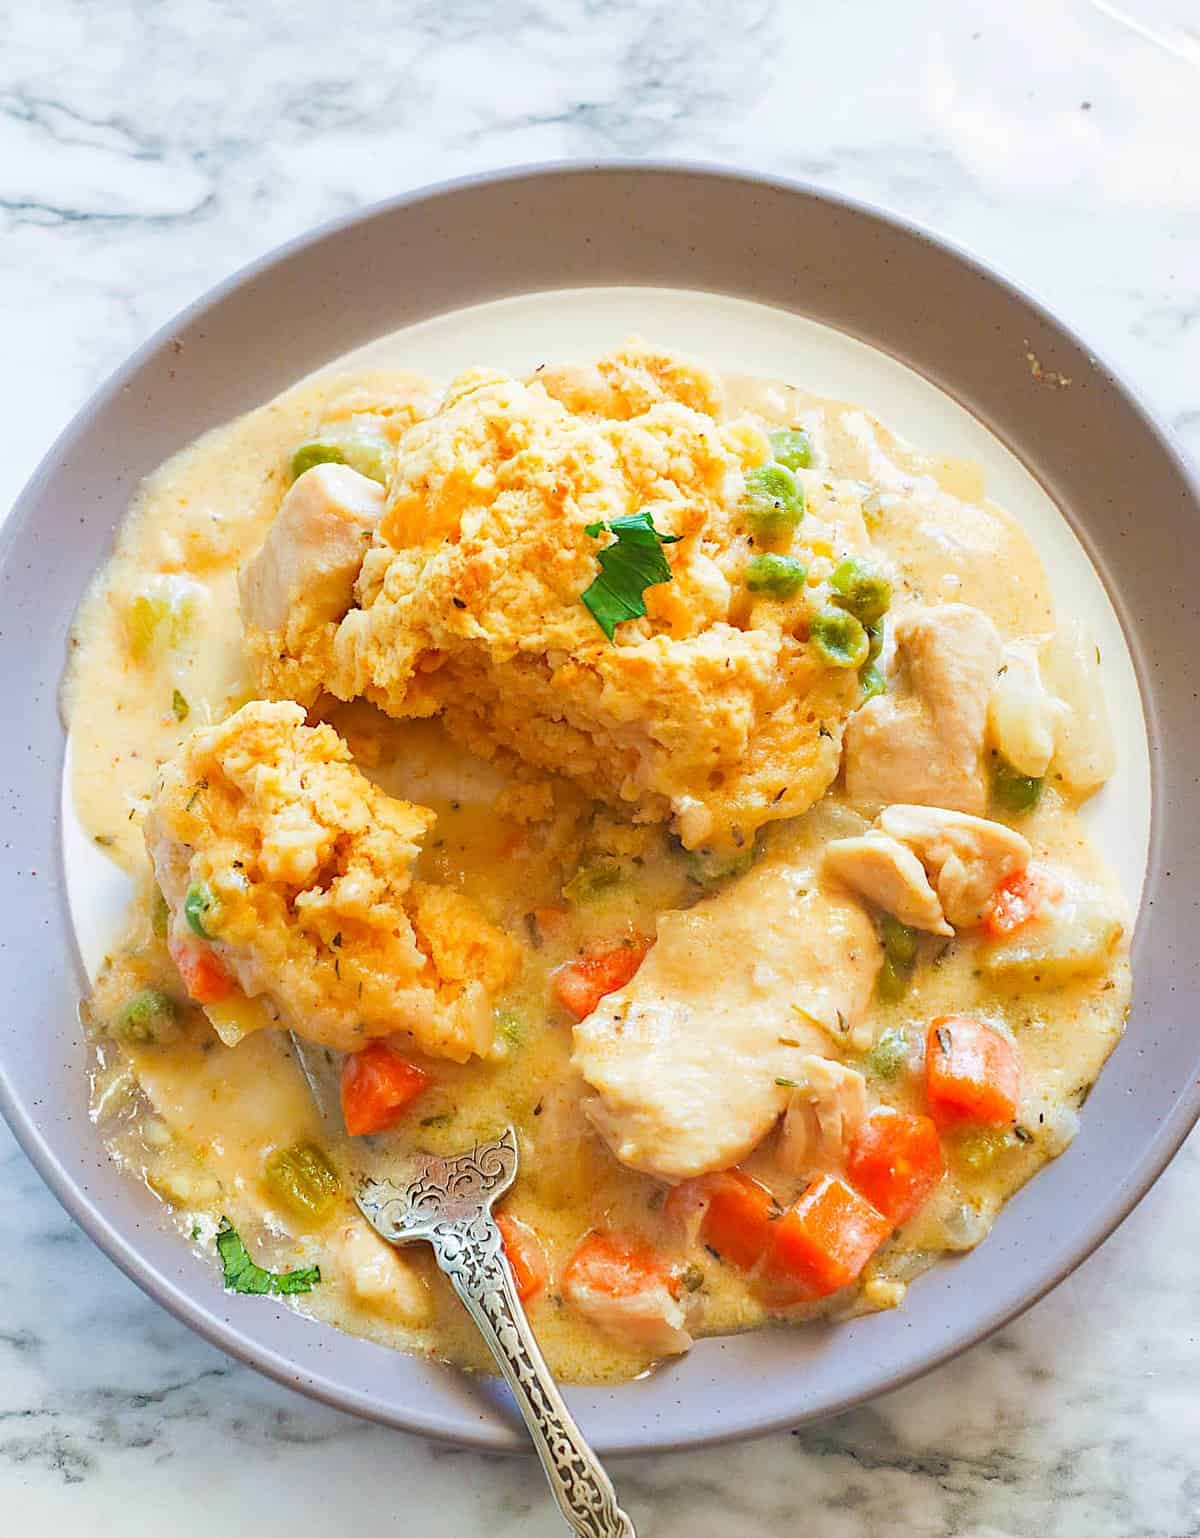 Creamy Chicken and Biscuits - Immaculate Bites